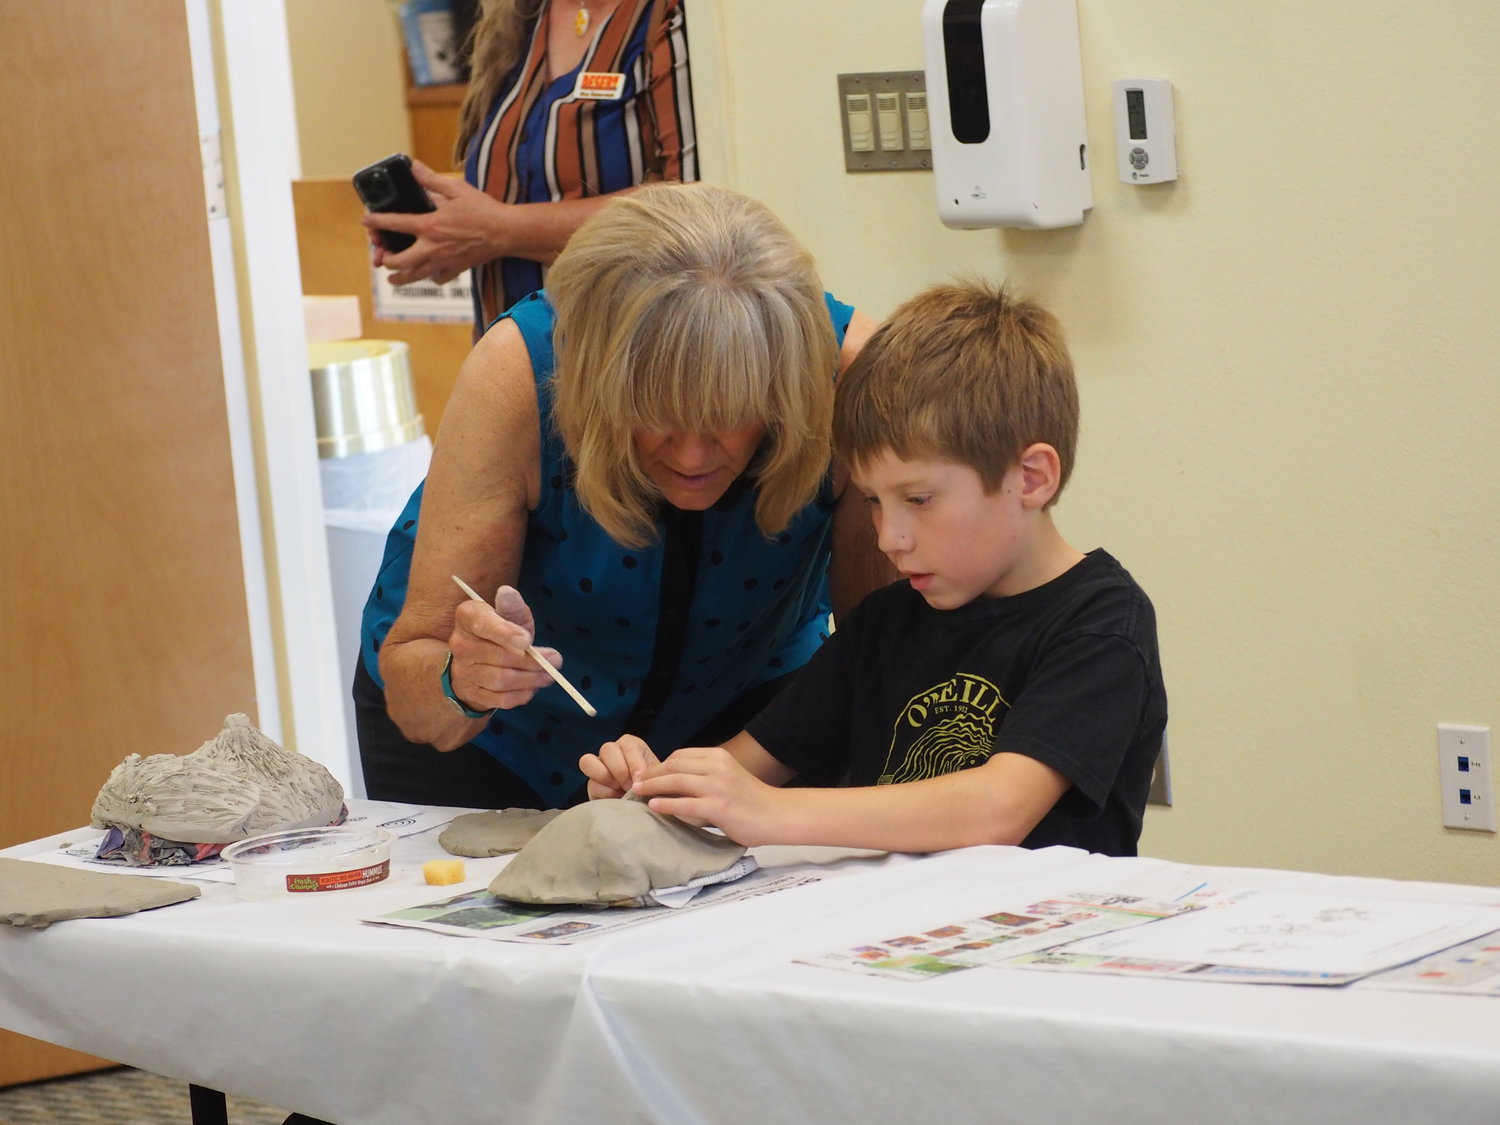 A CLAY Festival volunteer works with a student molding a clay mask in the Bayard Public Library.